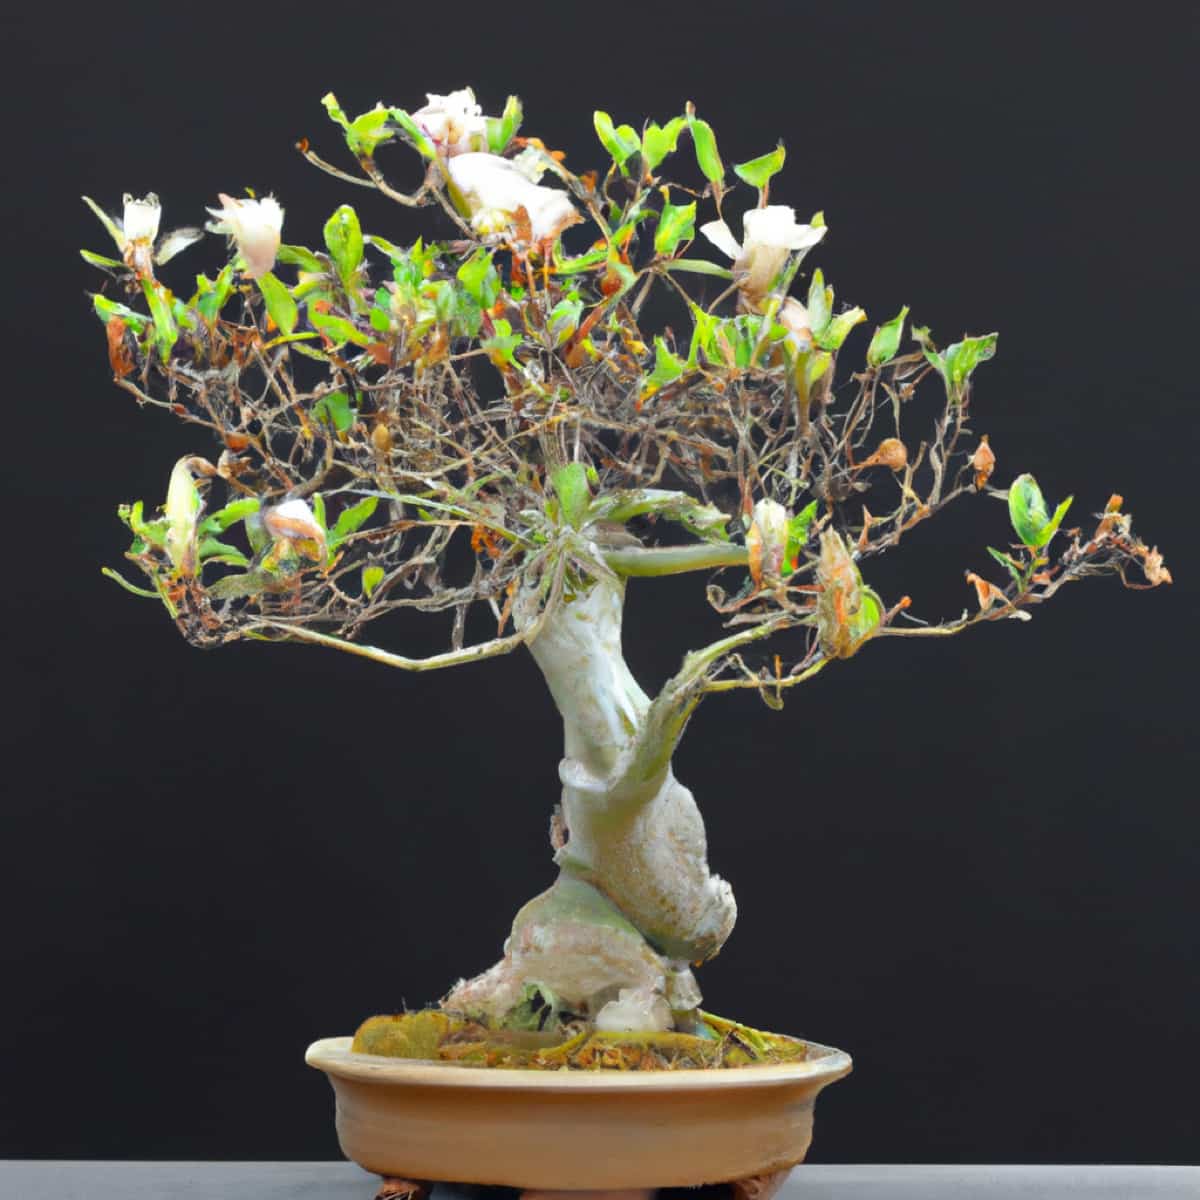 How to Grow and Care for Magnolia Bonsai